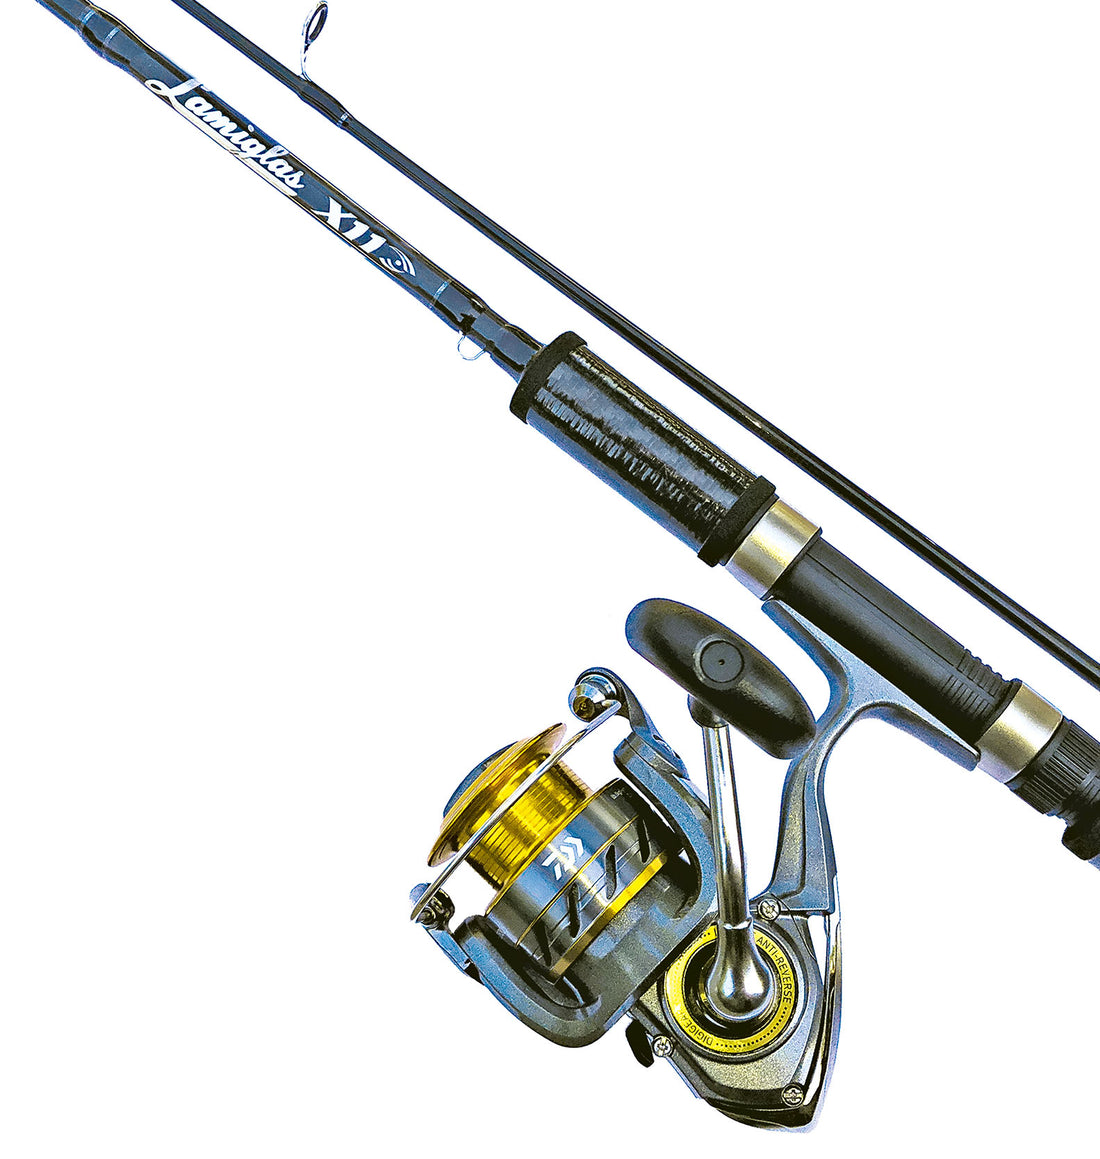 Fishing Rod Review - Lamiglas Norwest Special, Salmon Rod